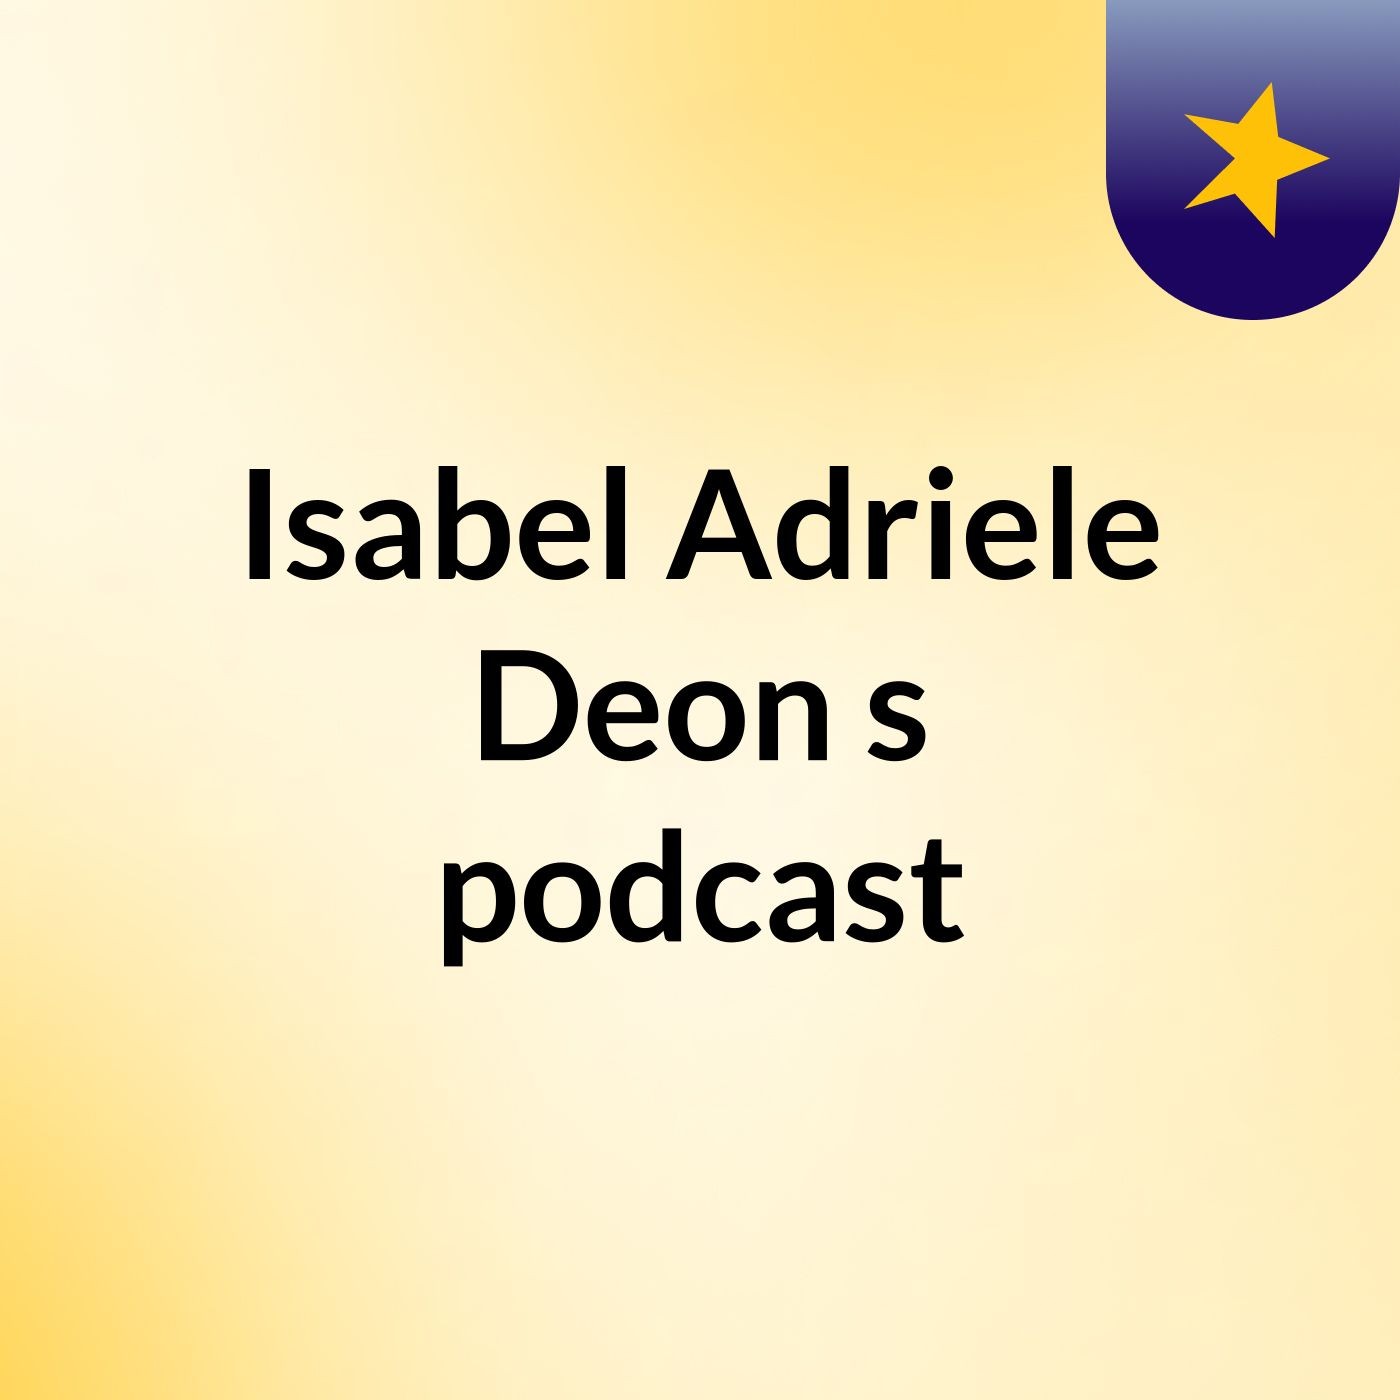 Isabel Adriele Deon's podcast